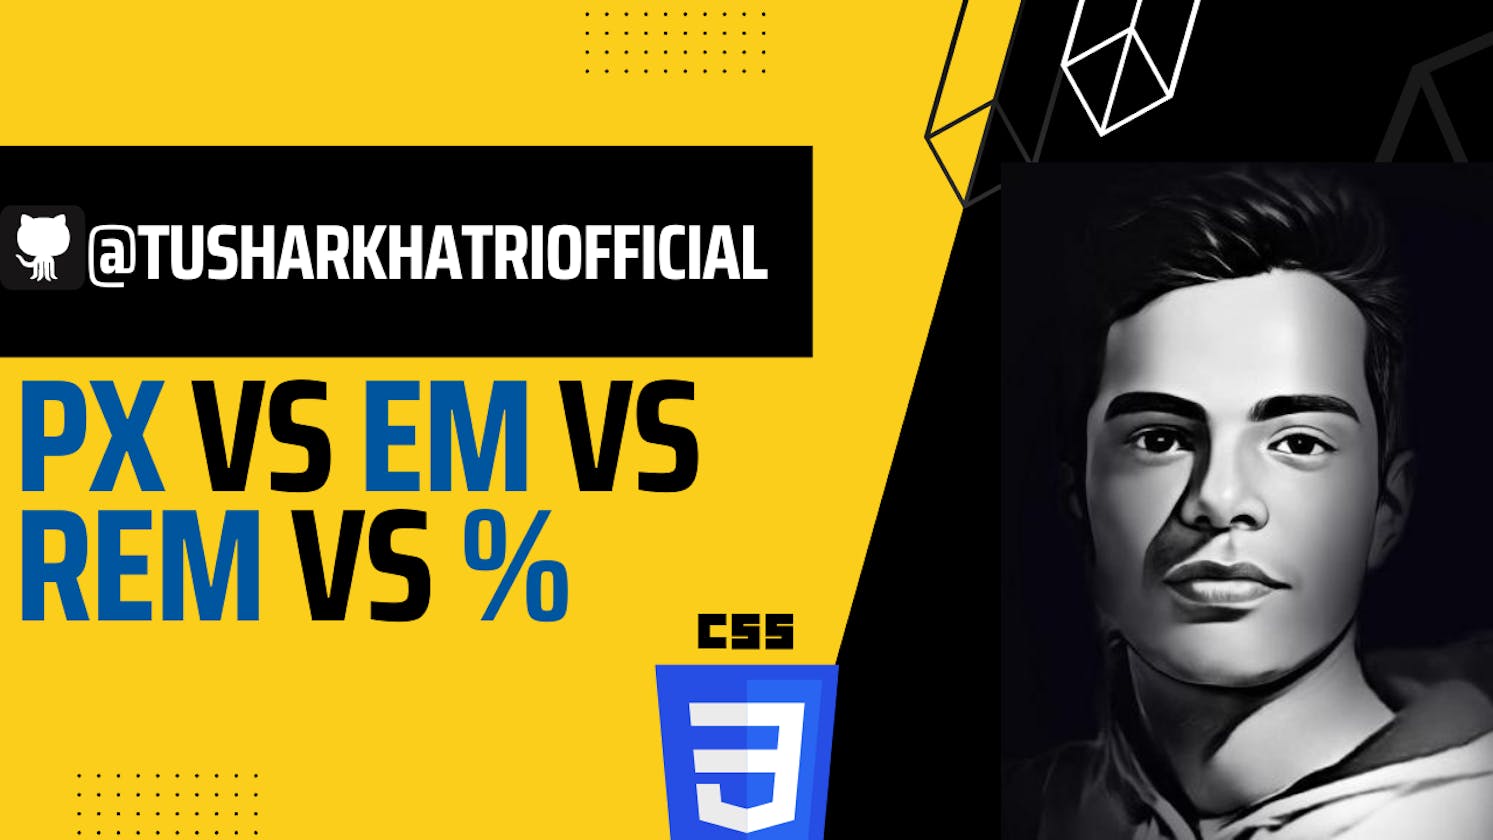 px vs em vs rem vs %. Which one do I use while designing web pages?